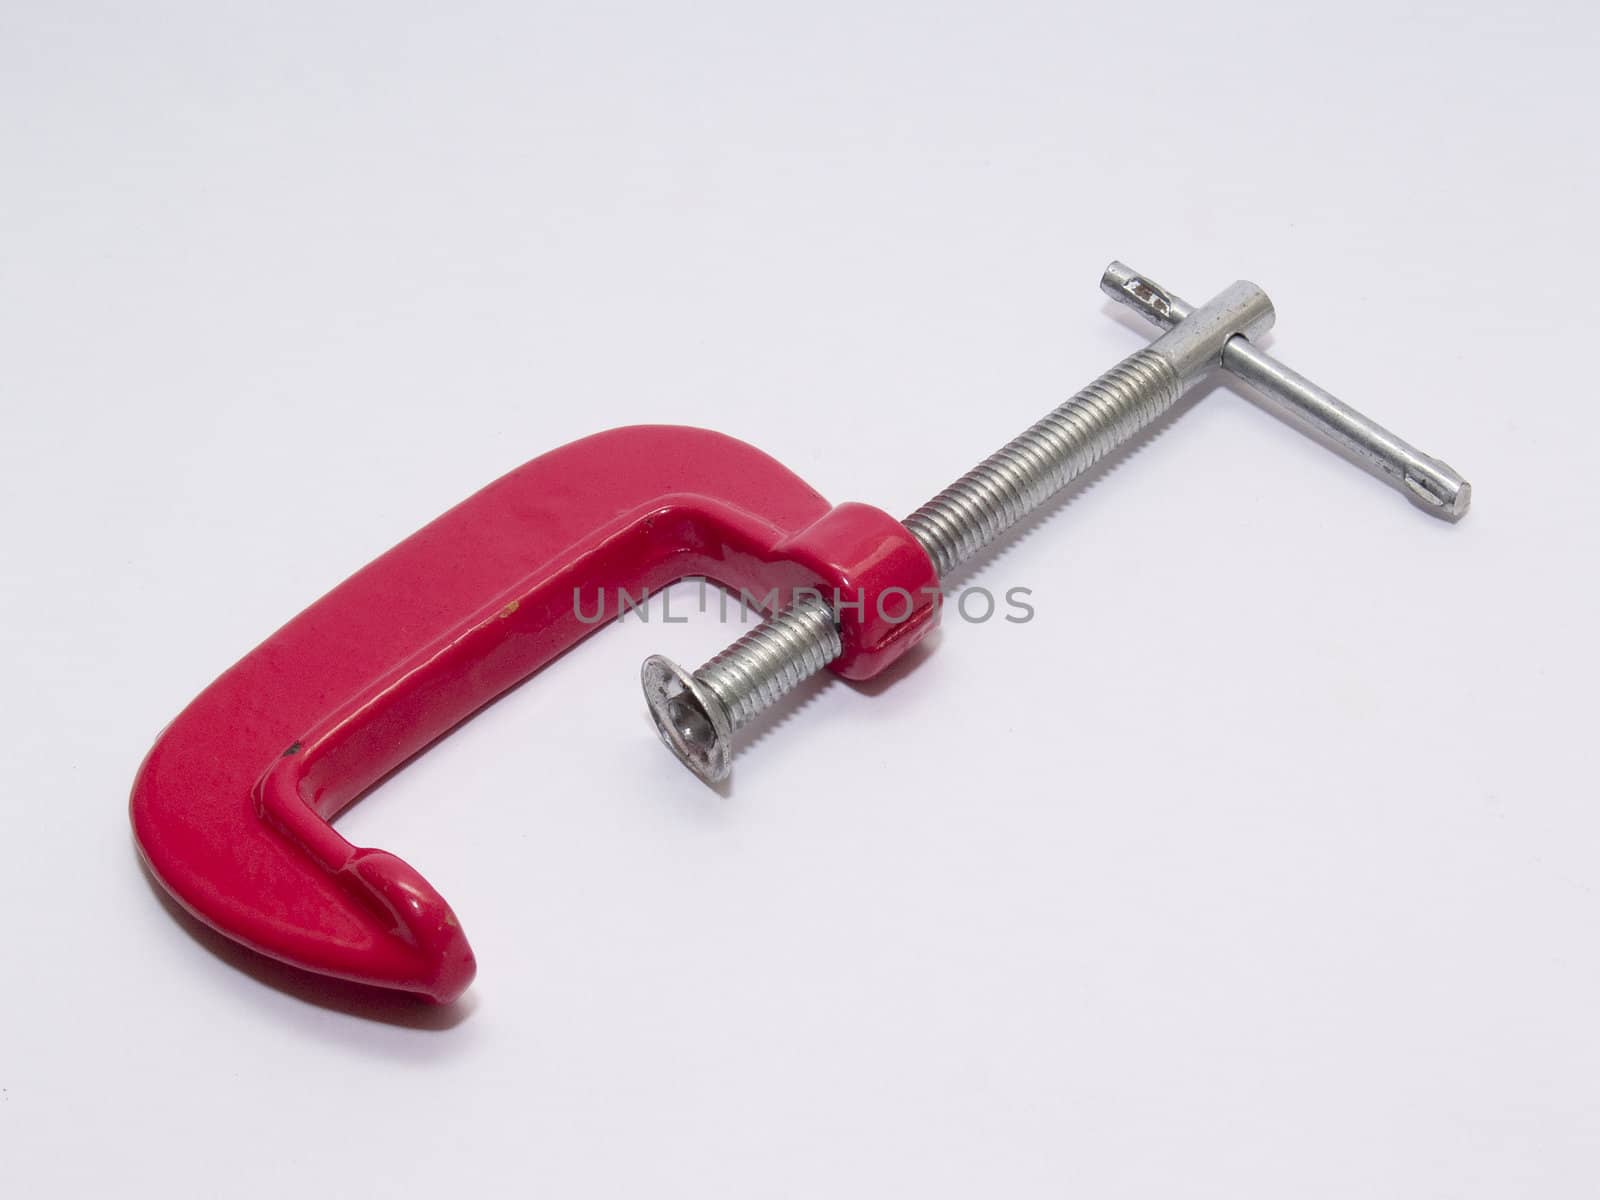 C-Clamp by lauria